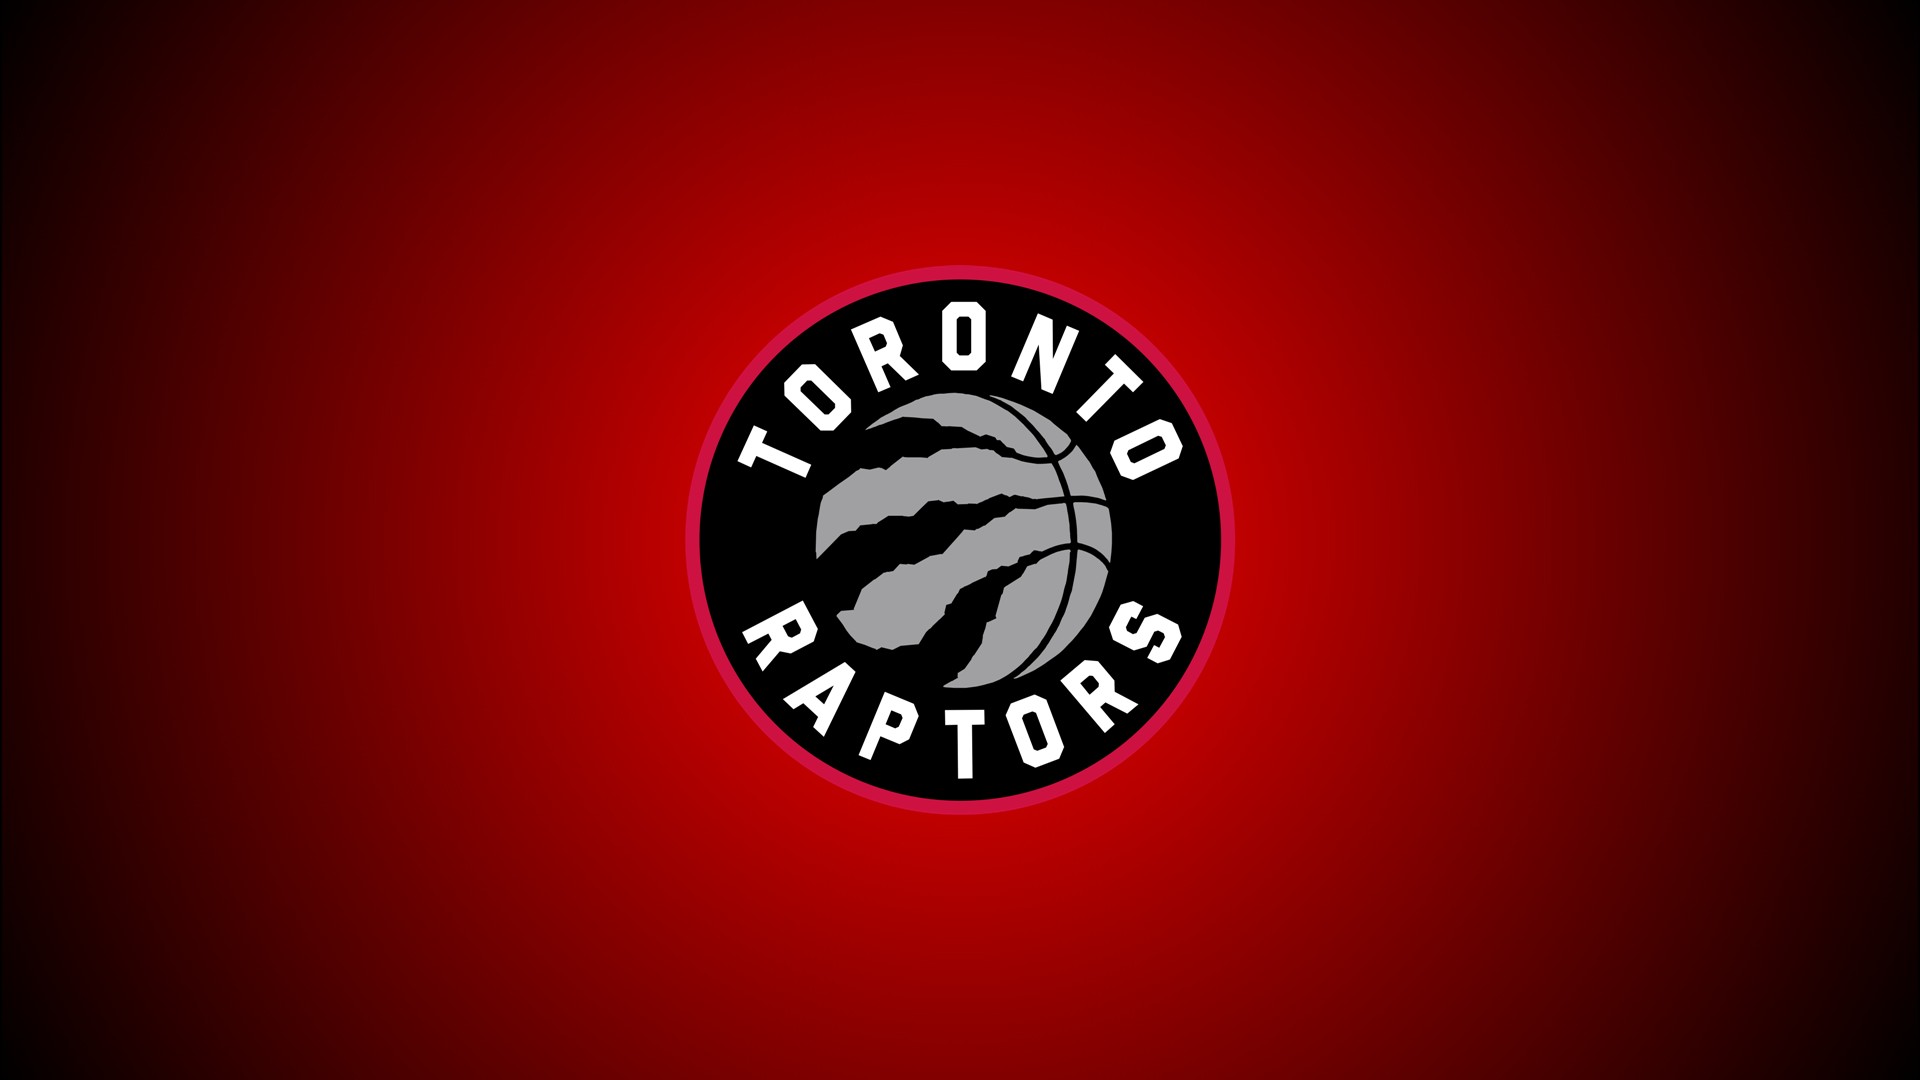 Raptors Basketball For PC Wallpaper with image dimensions 1920X1080 pixel. You can make this wallpaper for your Desktop Computer Backgrounds, Windows or Mac Screensavers, iPhone Lock screen, Tablet or Android and another Mobile Phone device